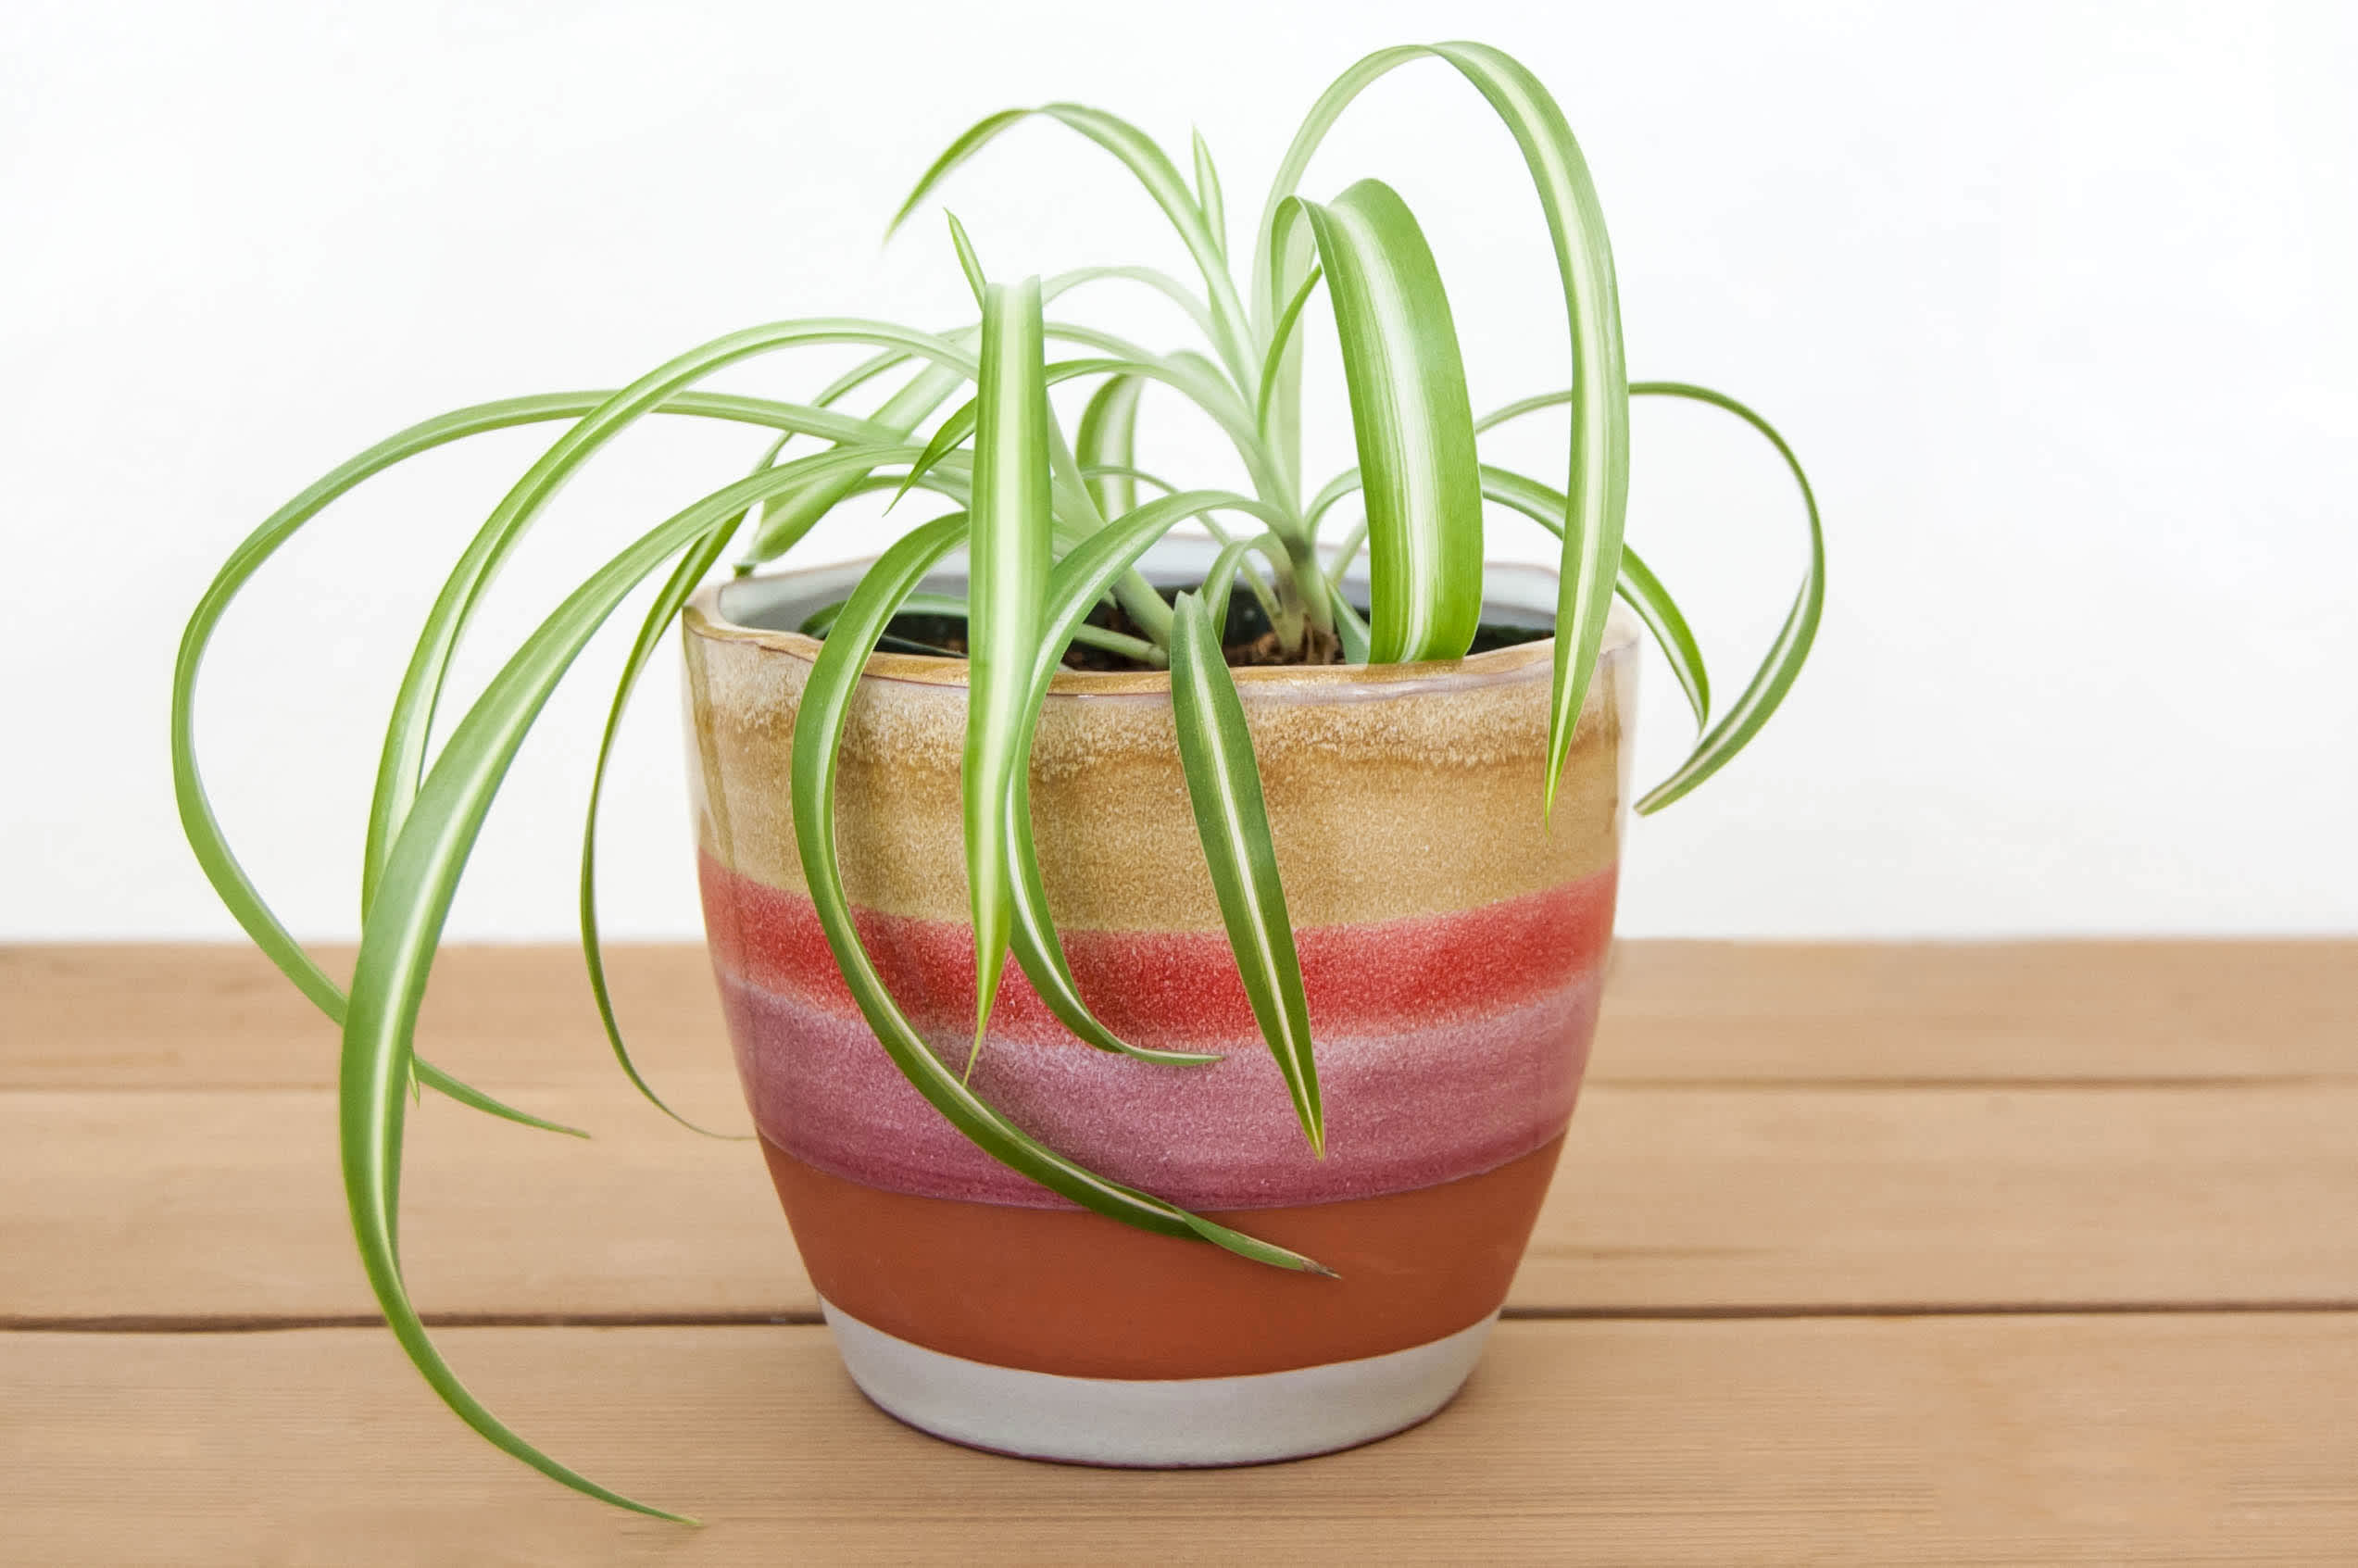 How to Grow and Care for a Spider Plant